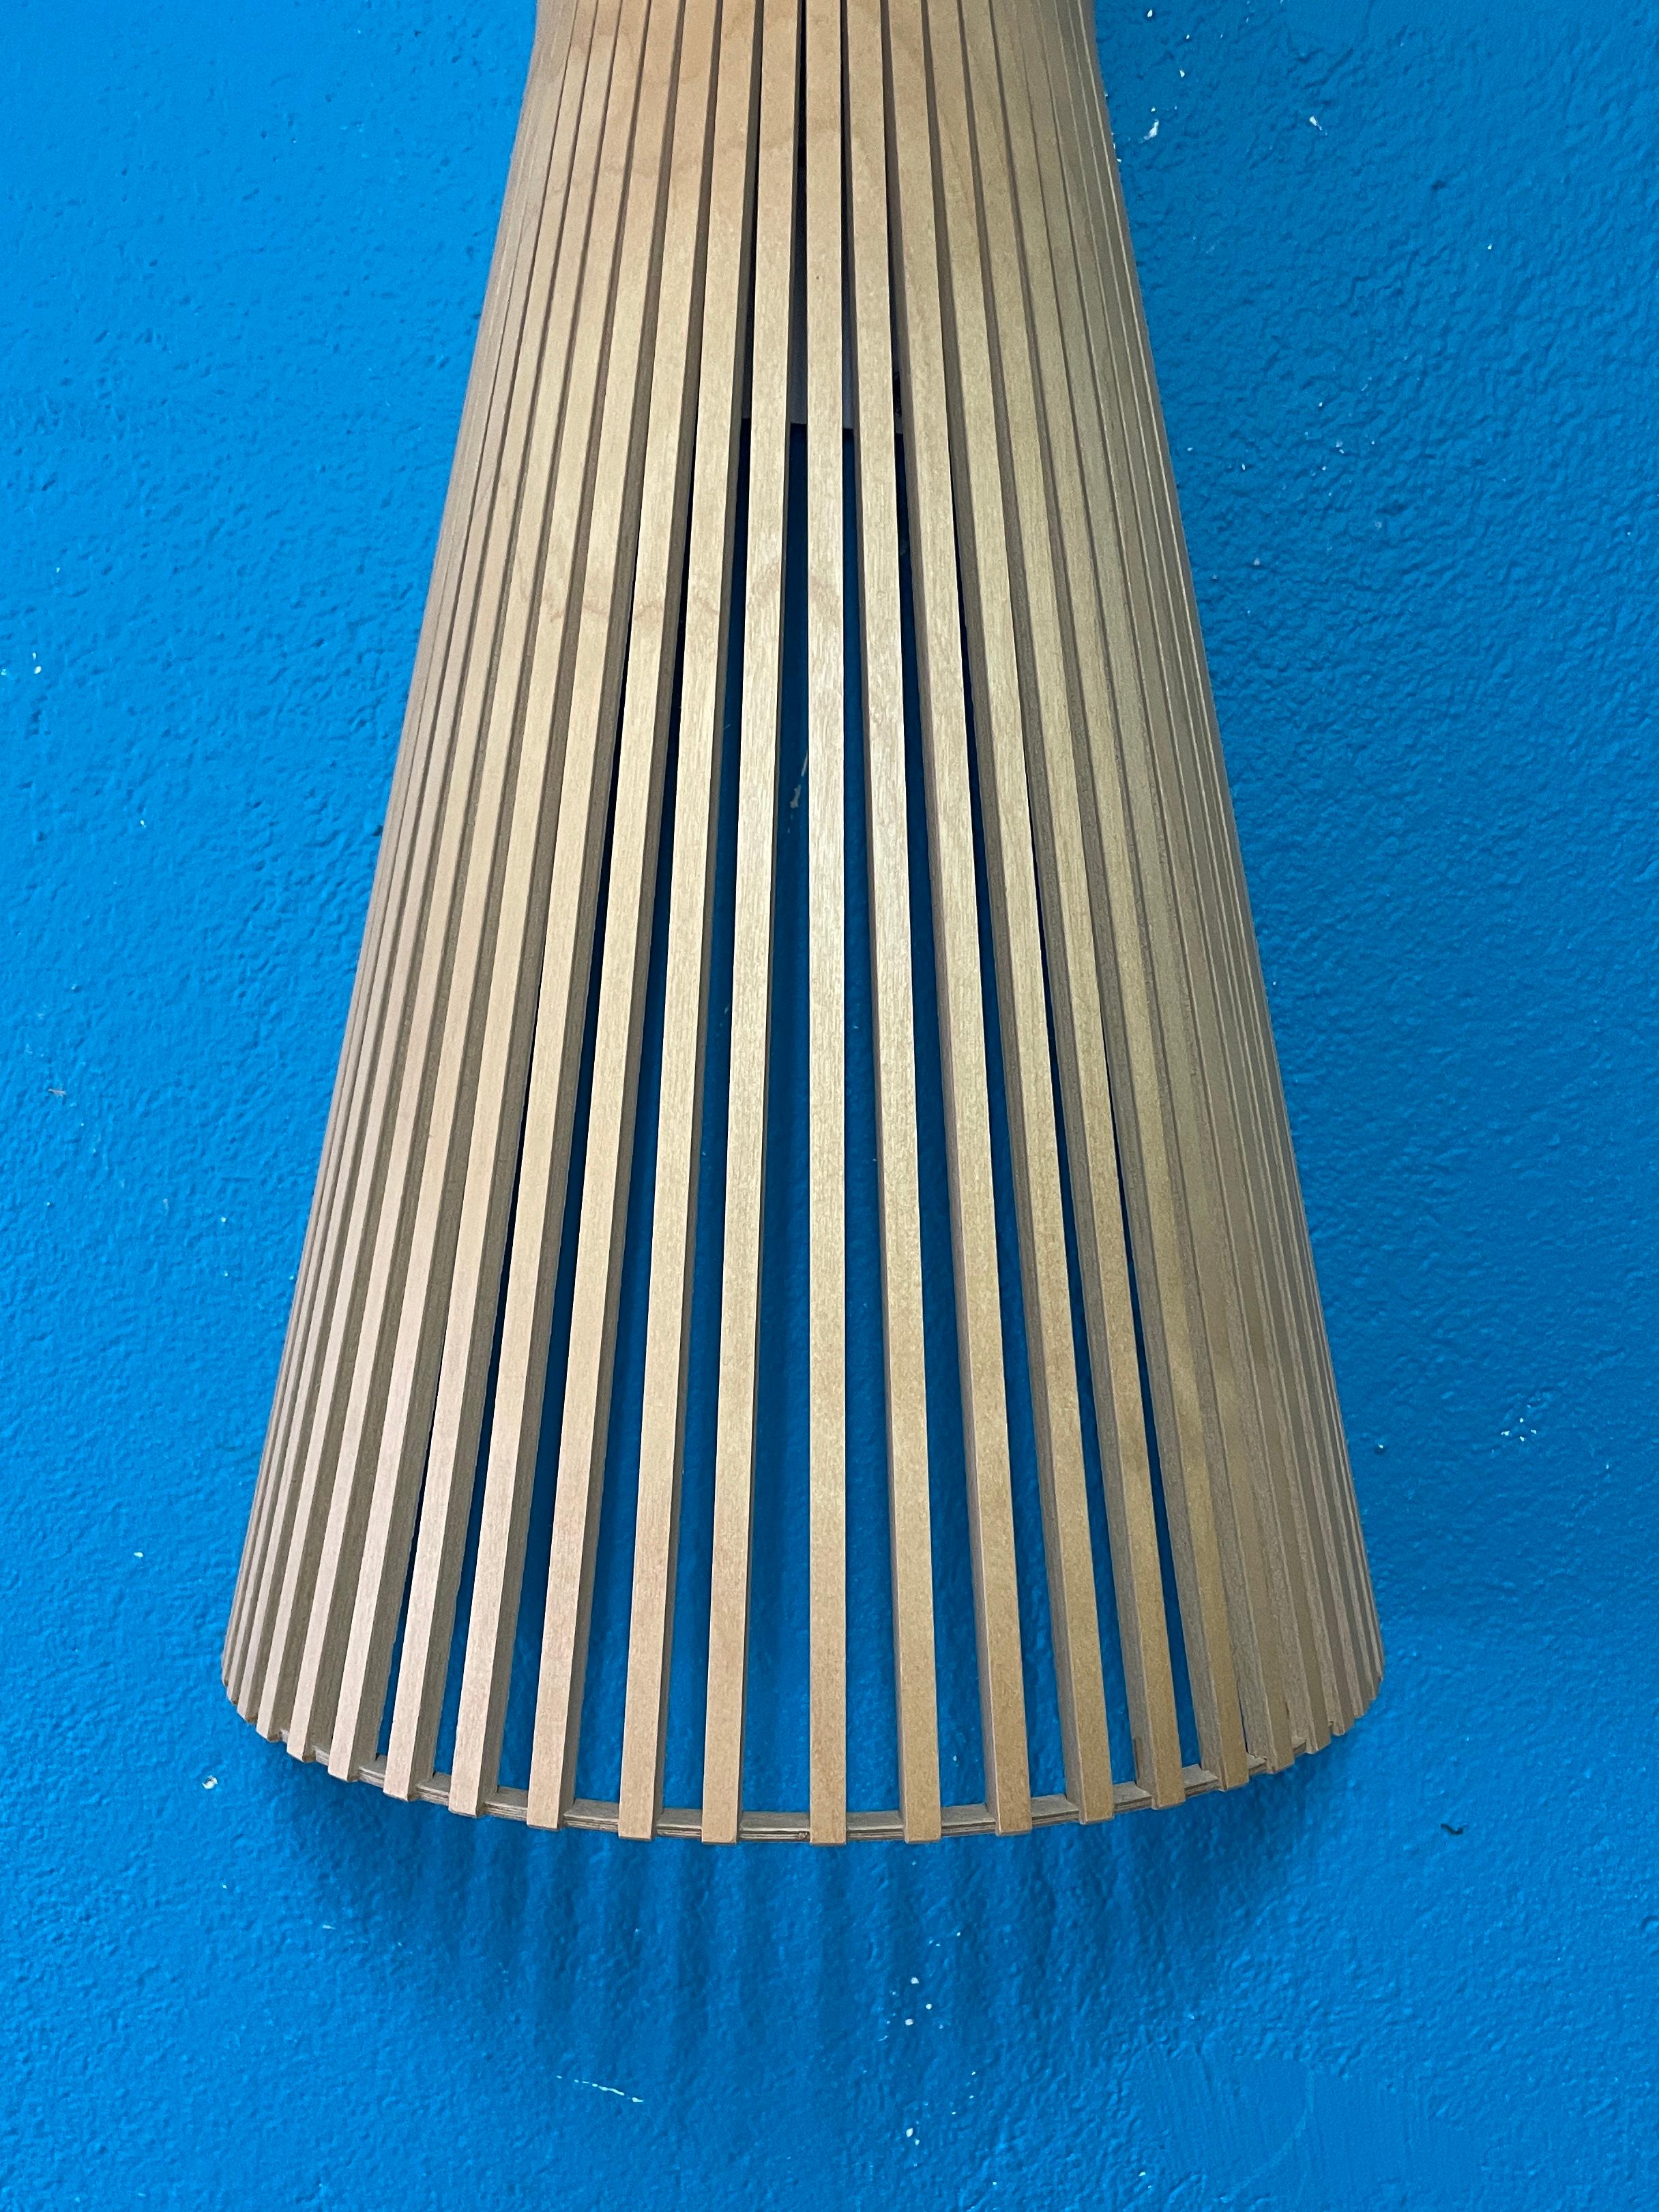 Contemporary Wooden Secto 4230 Wall Lamp by Secto Design Finland For Sale